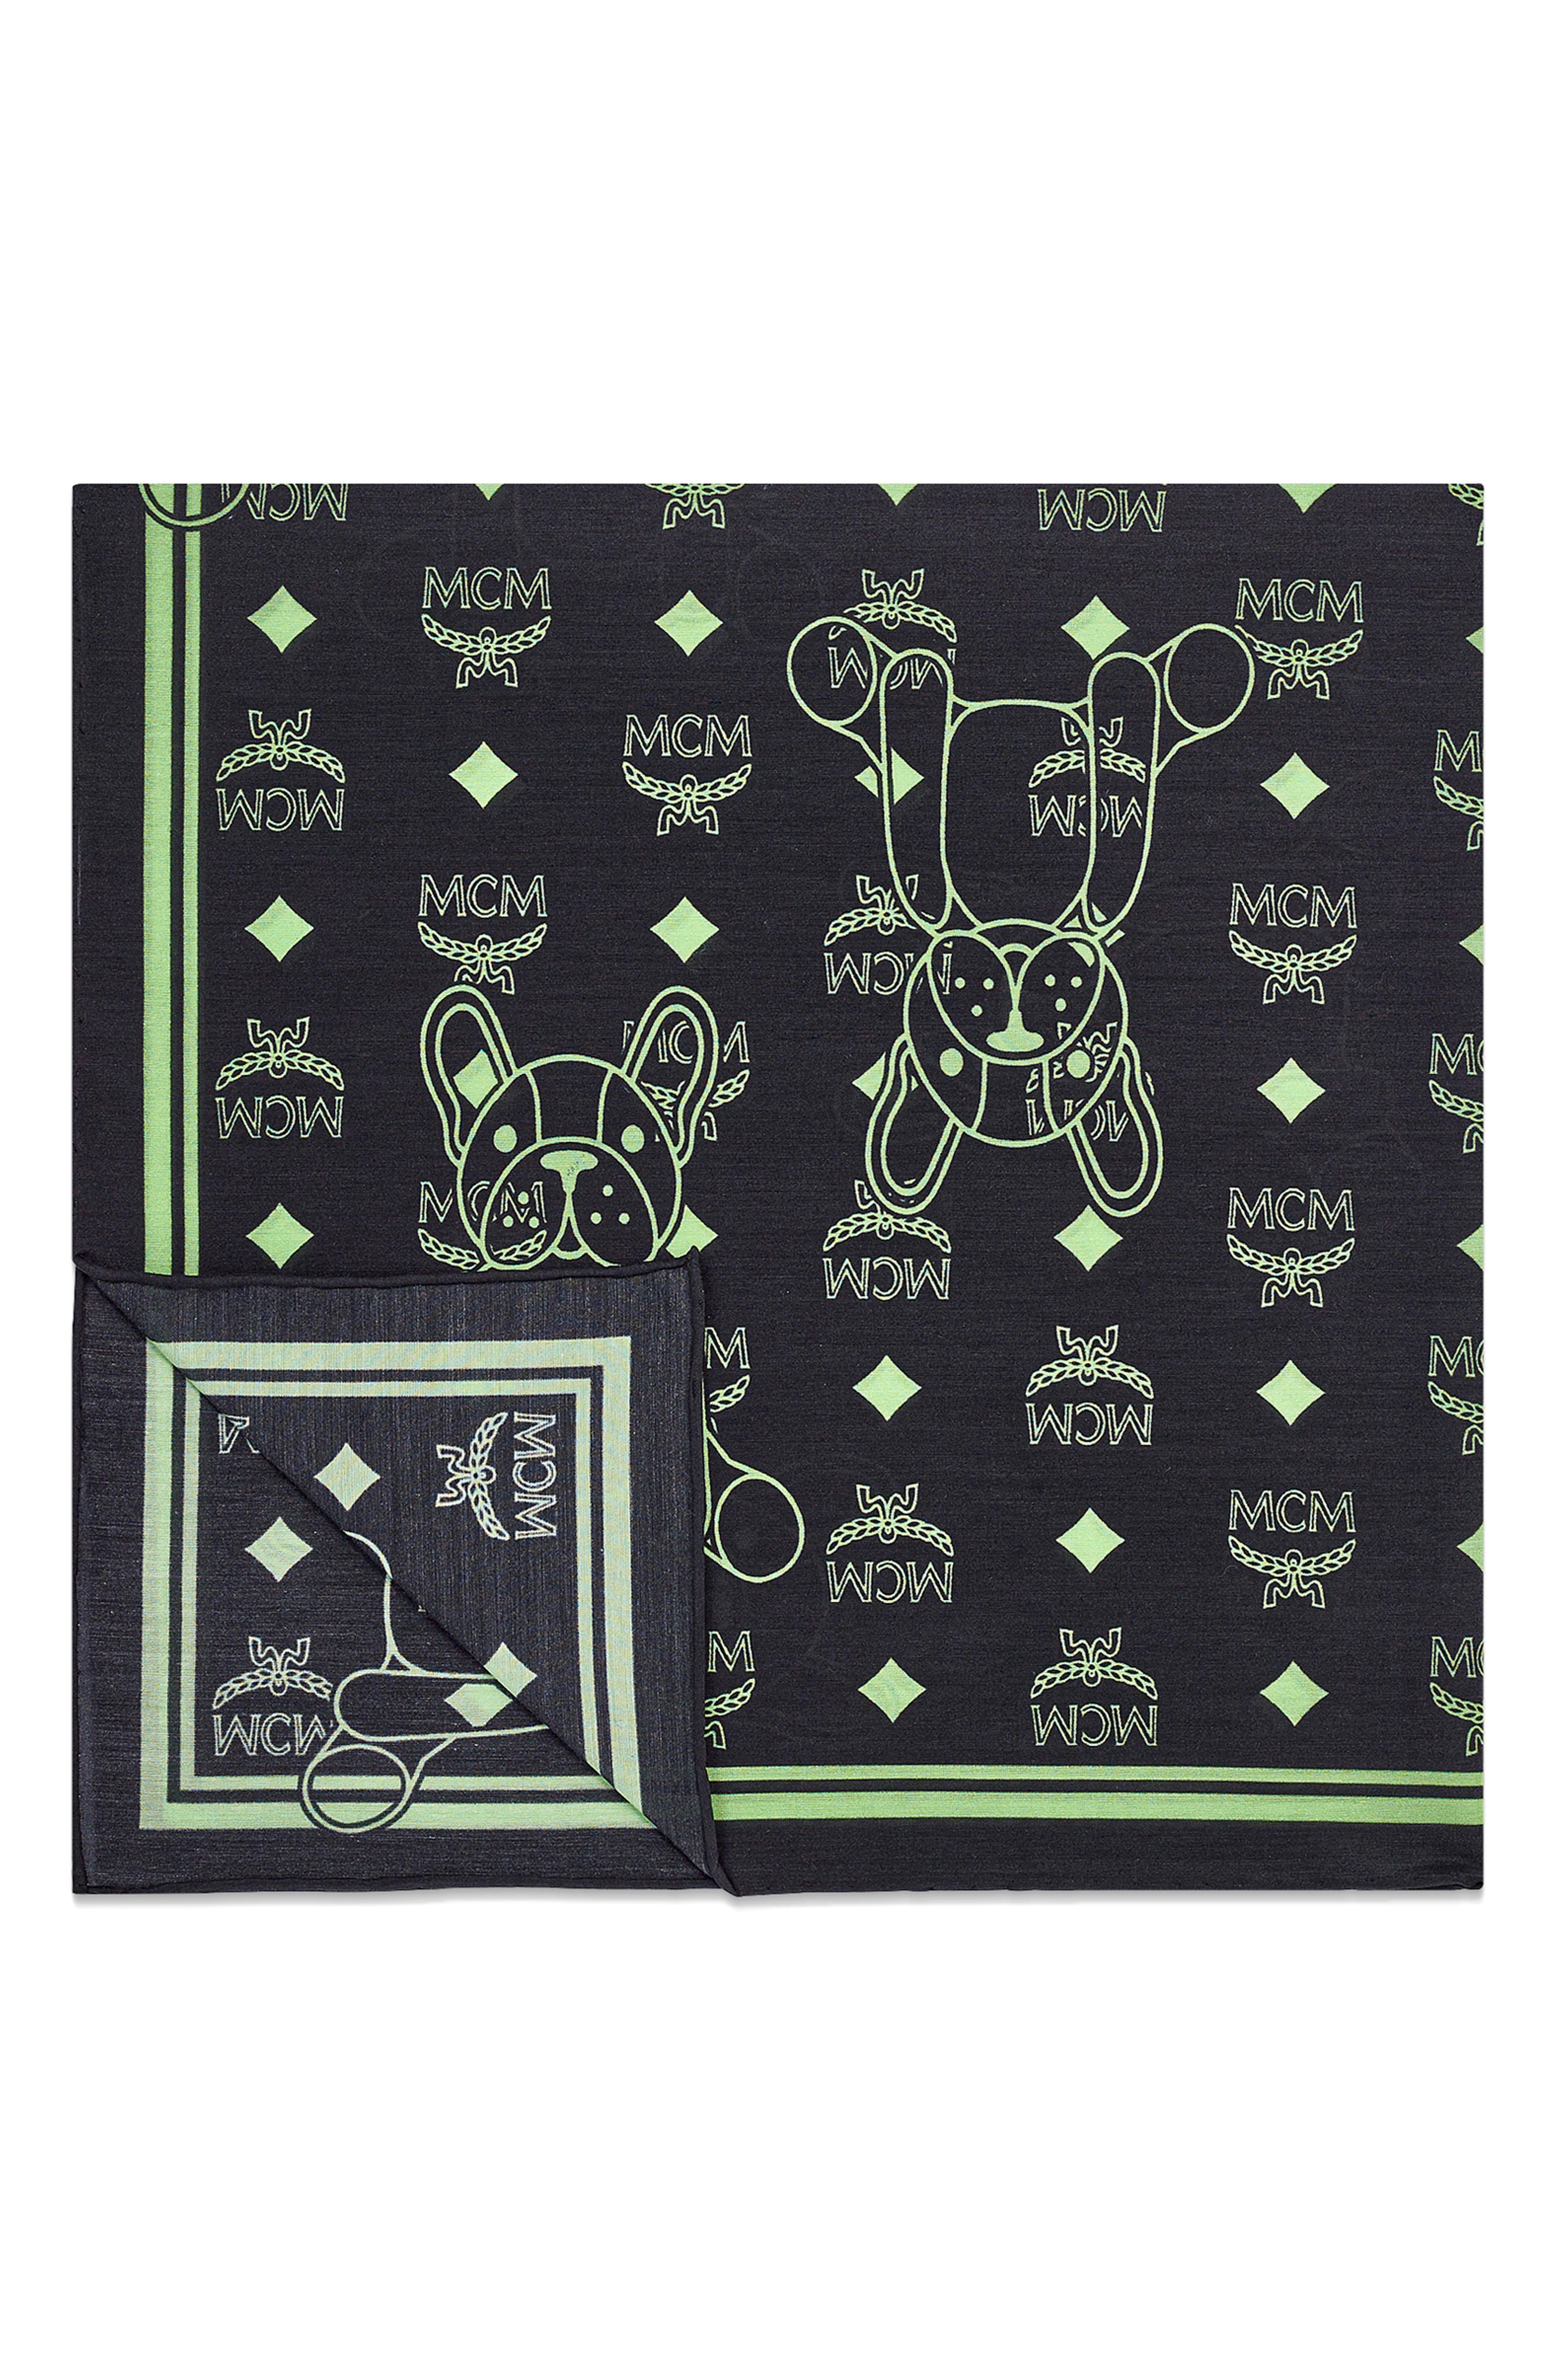 MCM Pup Print Square Cotton & Silk Scarf in Black at Nordstrom